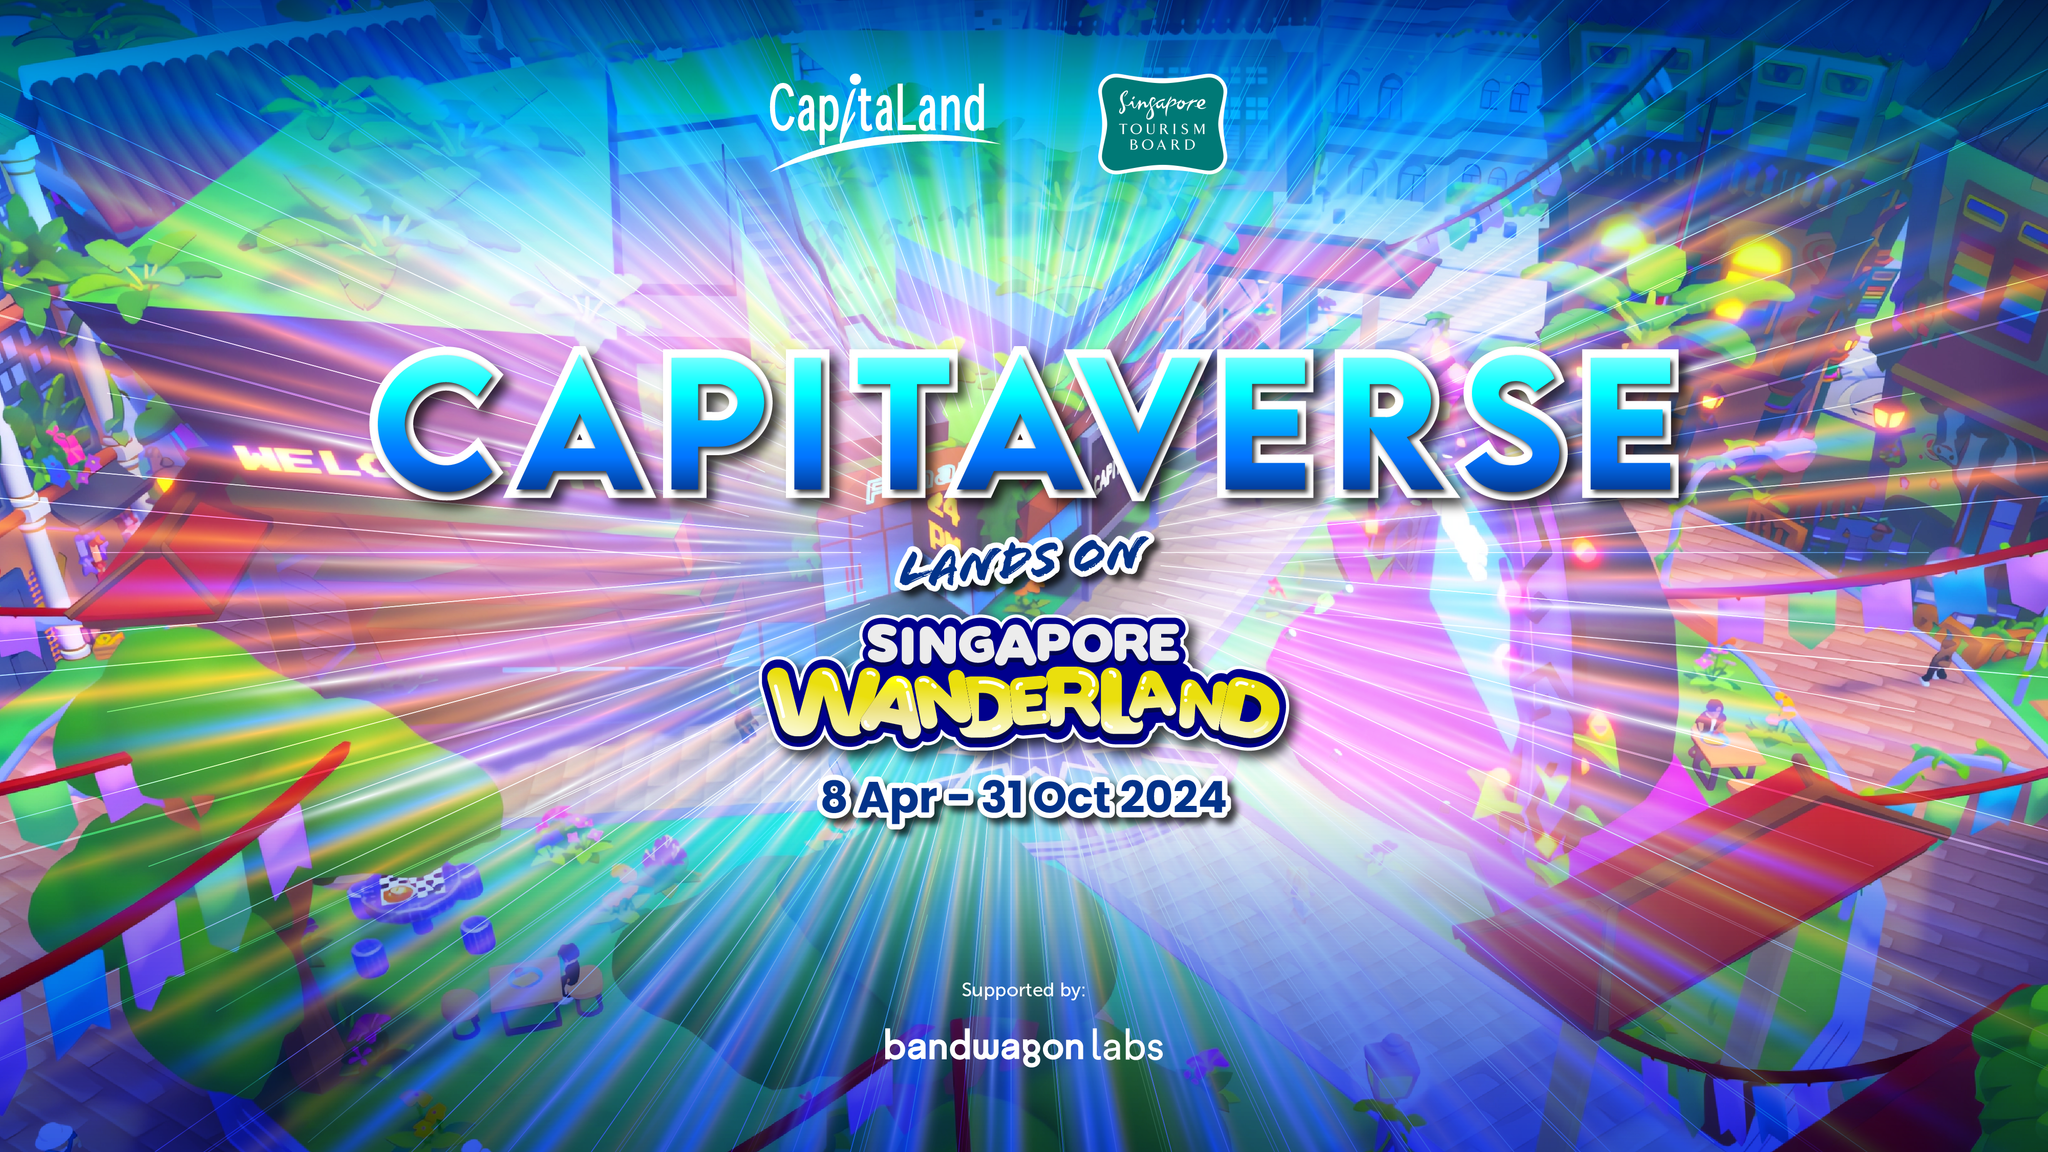 CapitaVerse - CapitaLand’s Iconic 24-hour Experiential Party on the Metaverse is Back!